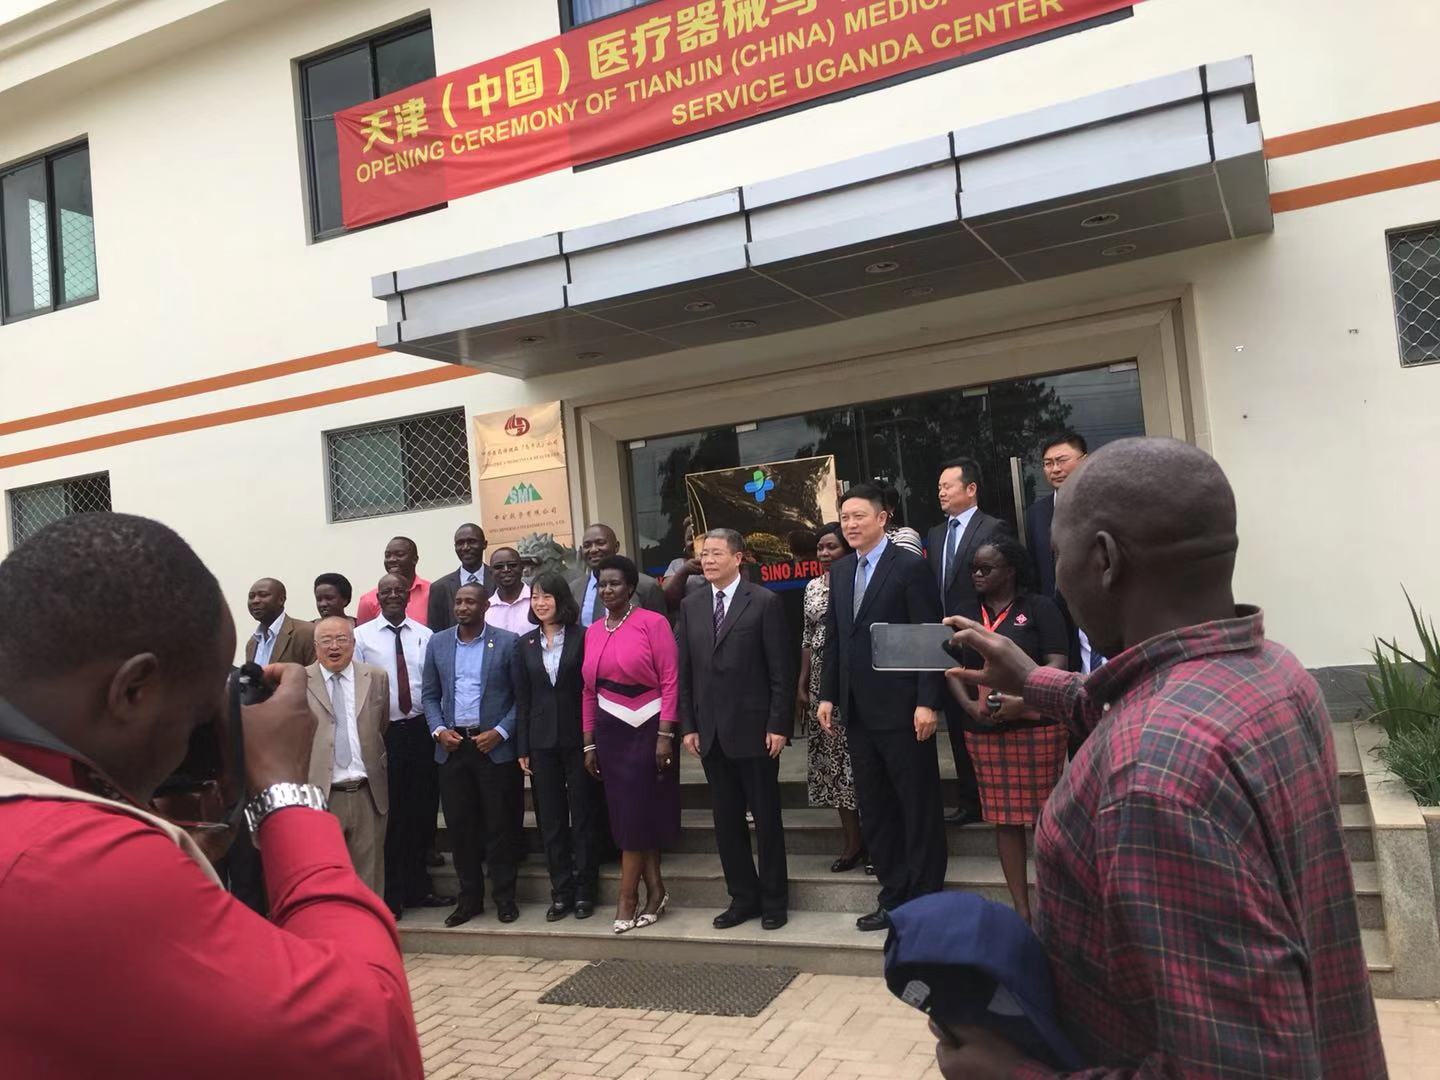 OPENING CEREMONY OF TIANJIN (CHINA) MEDICAL DEVICES EXHIBITION SALES AND SERVICE UGANDA CENTER